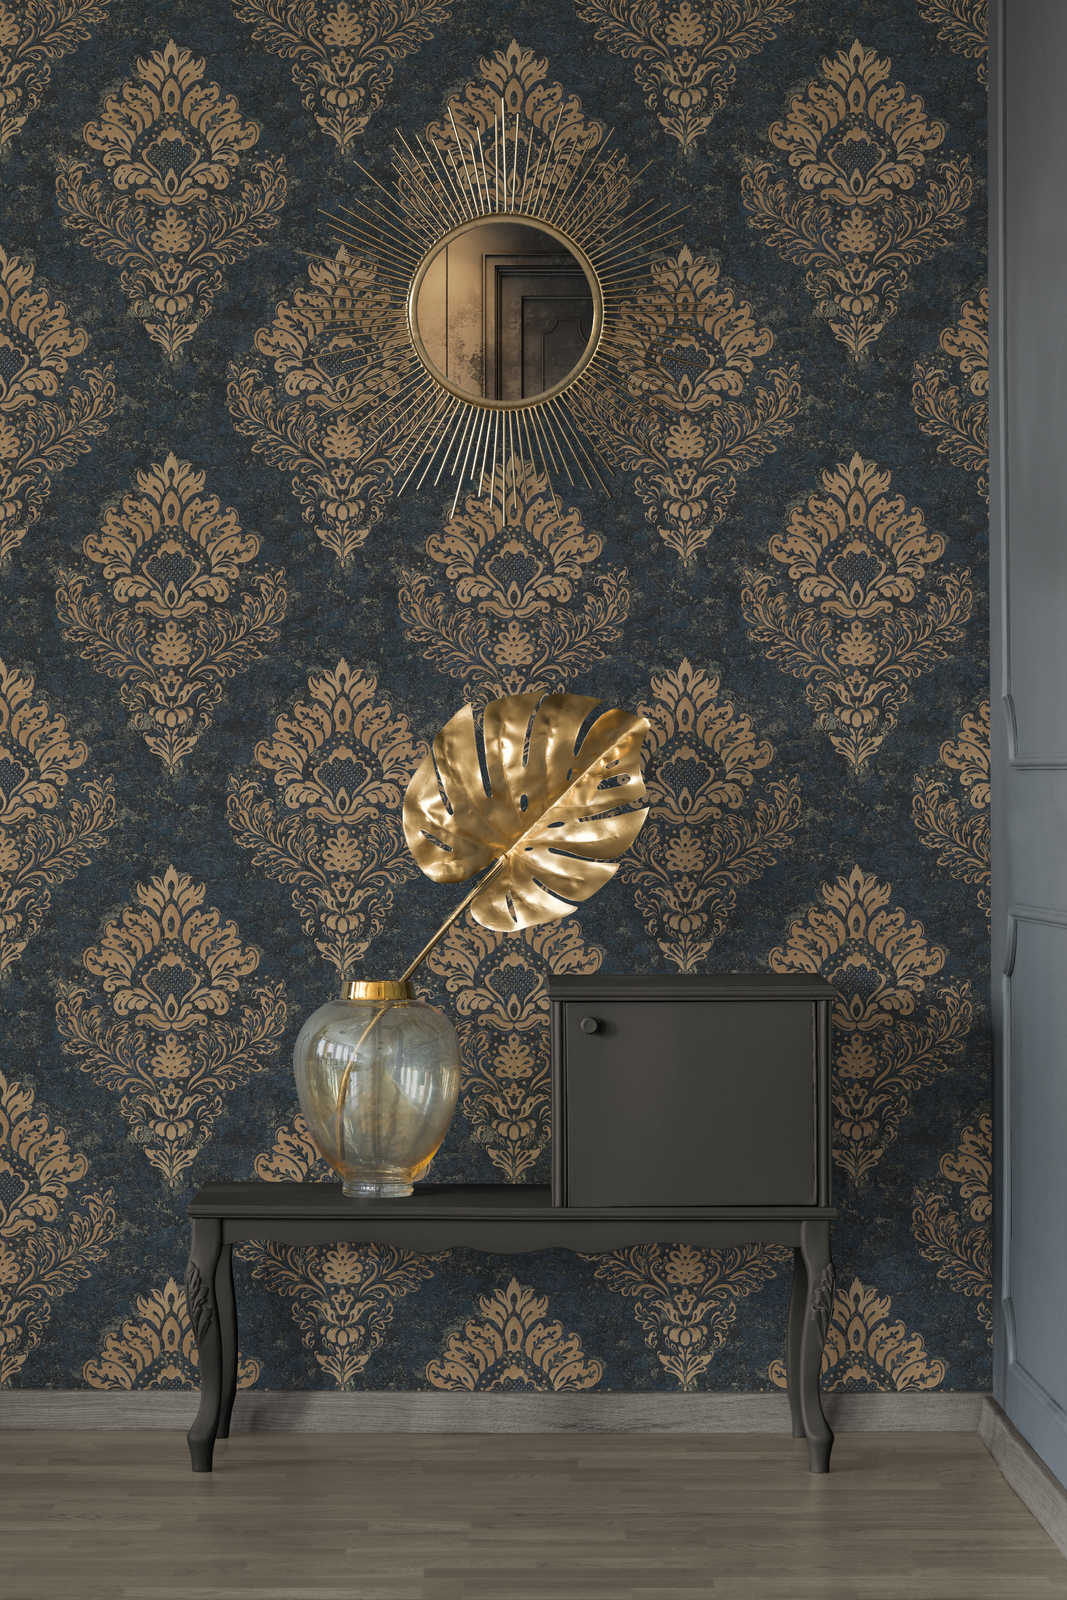             Ornamental wallpaper with floral style & gold effect - beige, blue, brown
        